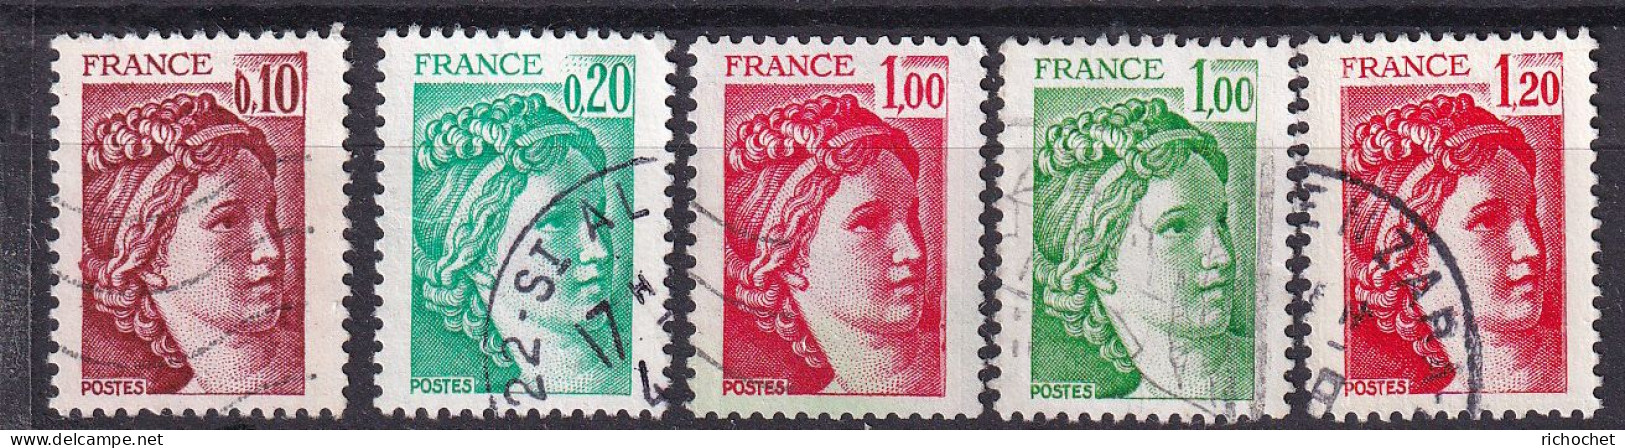 France 1965 + 1967 + 1972 à 1974 ° - Used Stamps